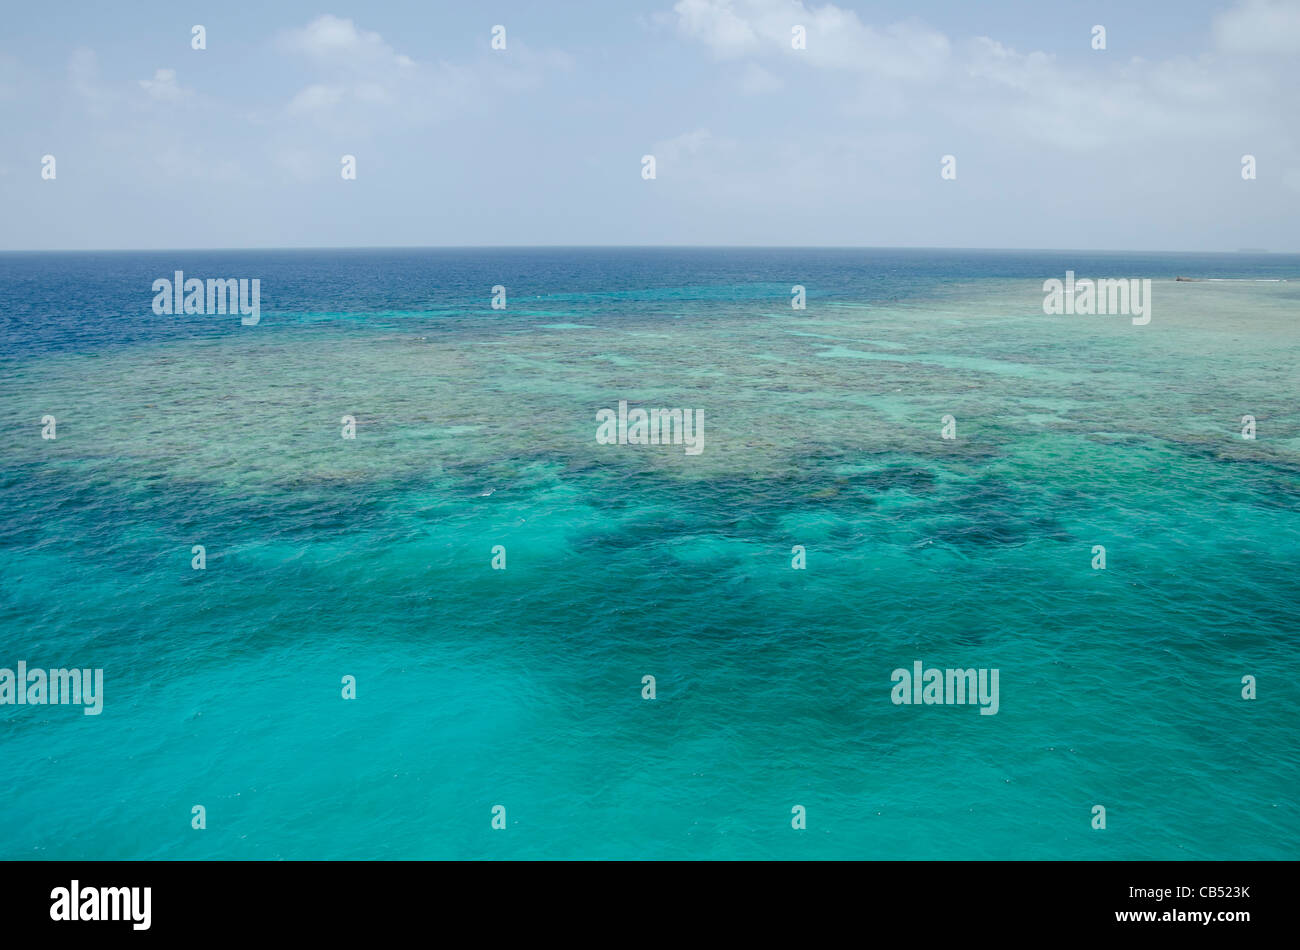 San Blas Islands Aerial View High Resolution Stock Photography and ...